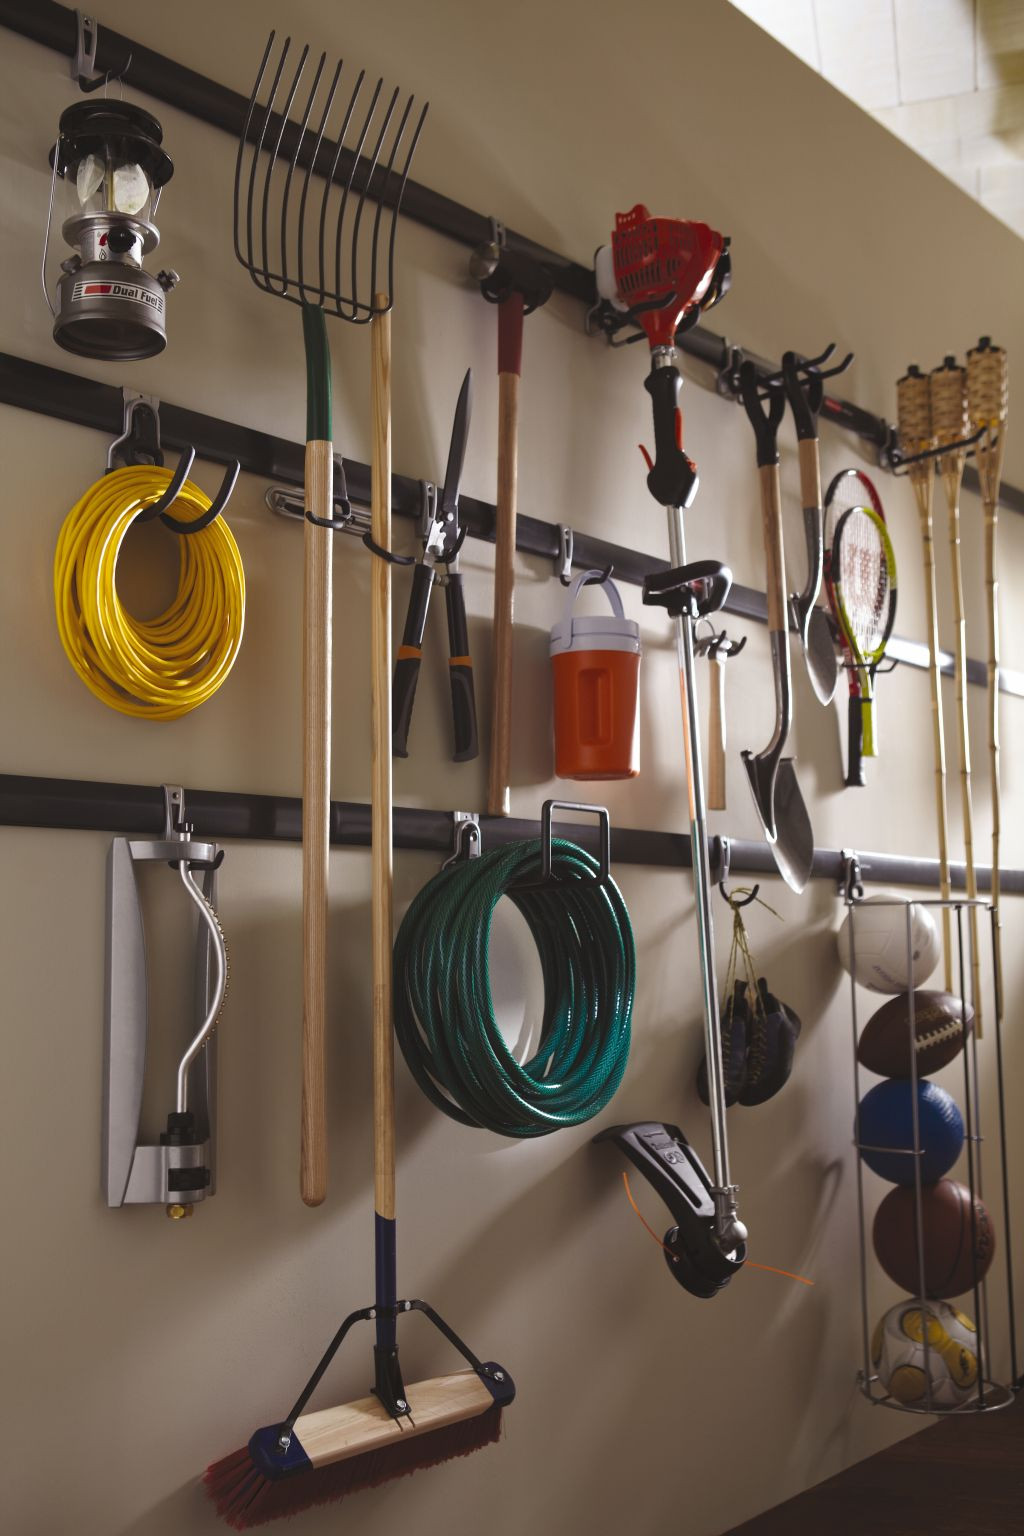 Garage Wall Organizer
 Time To Sort Out The Mess – 20 Tips For A Well Organized